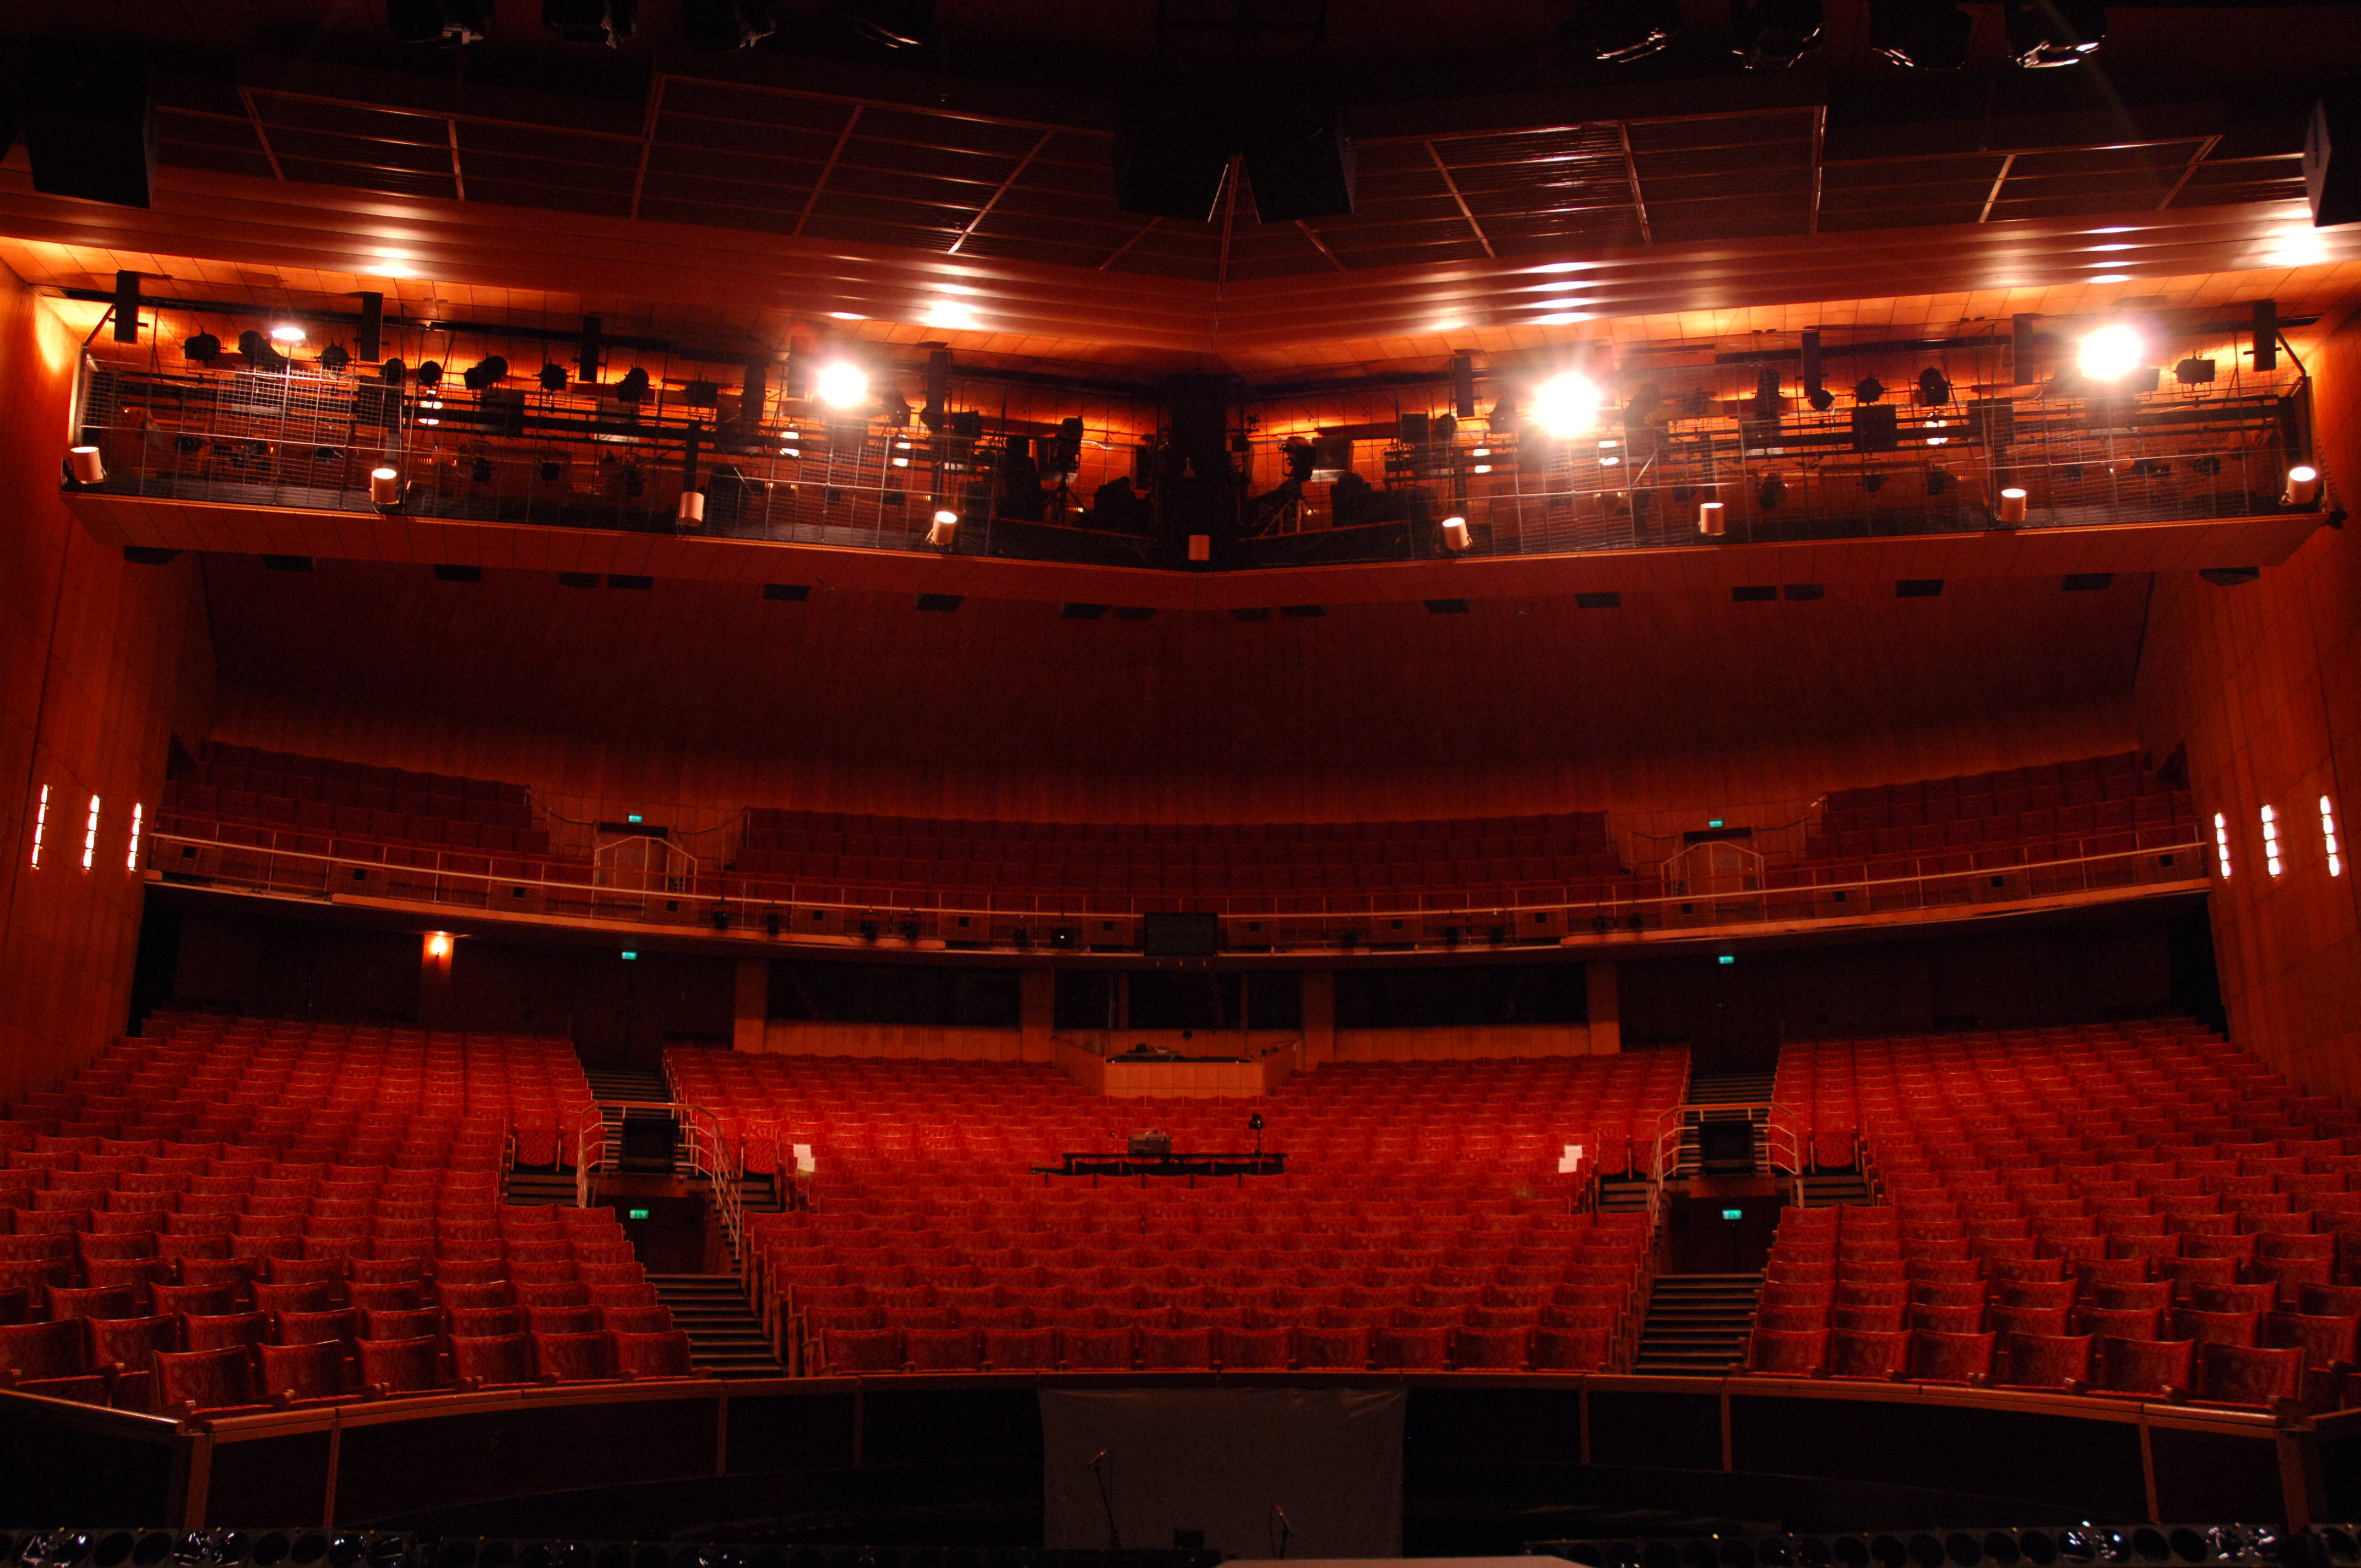 The auditorium as seen from the stage